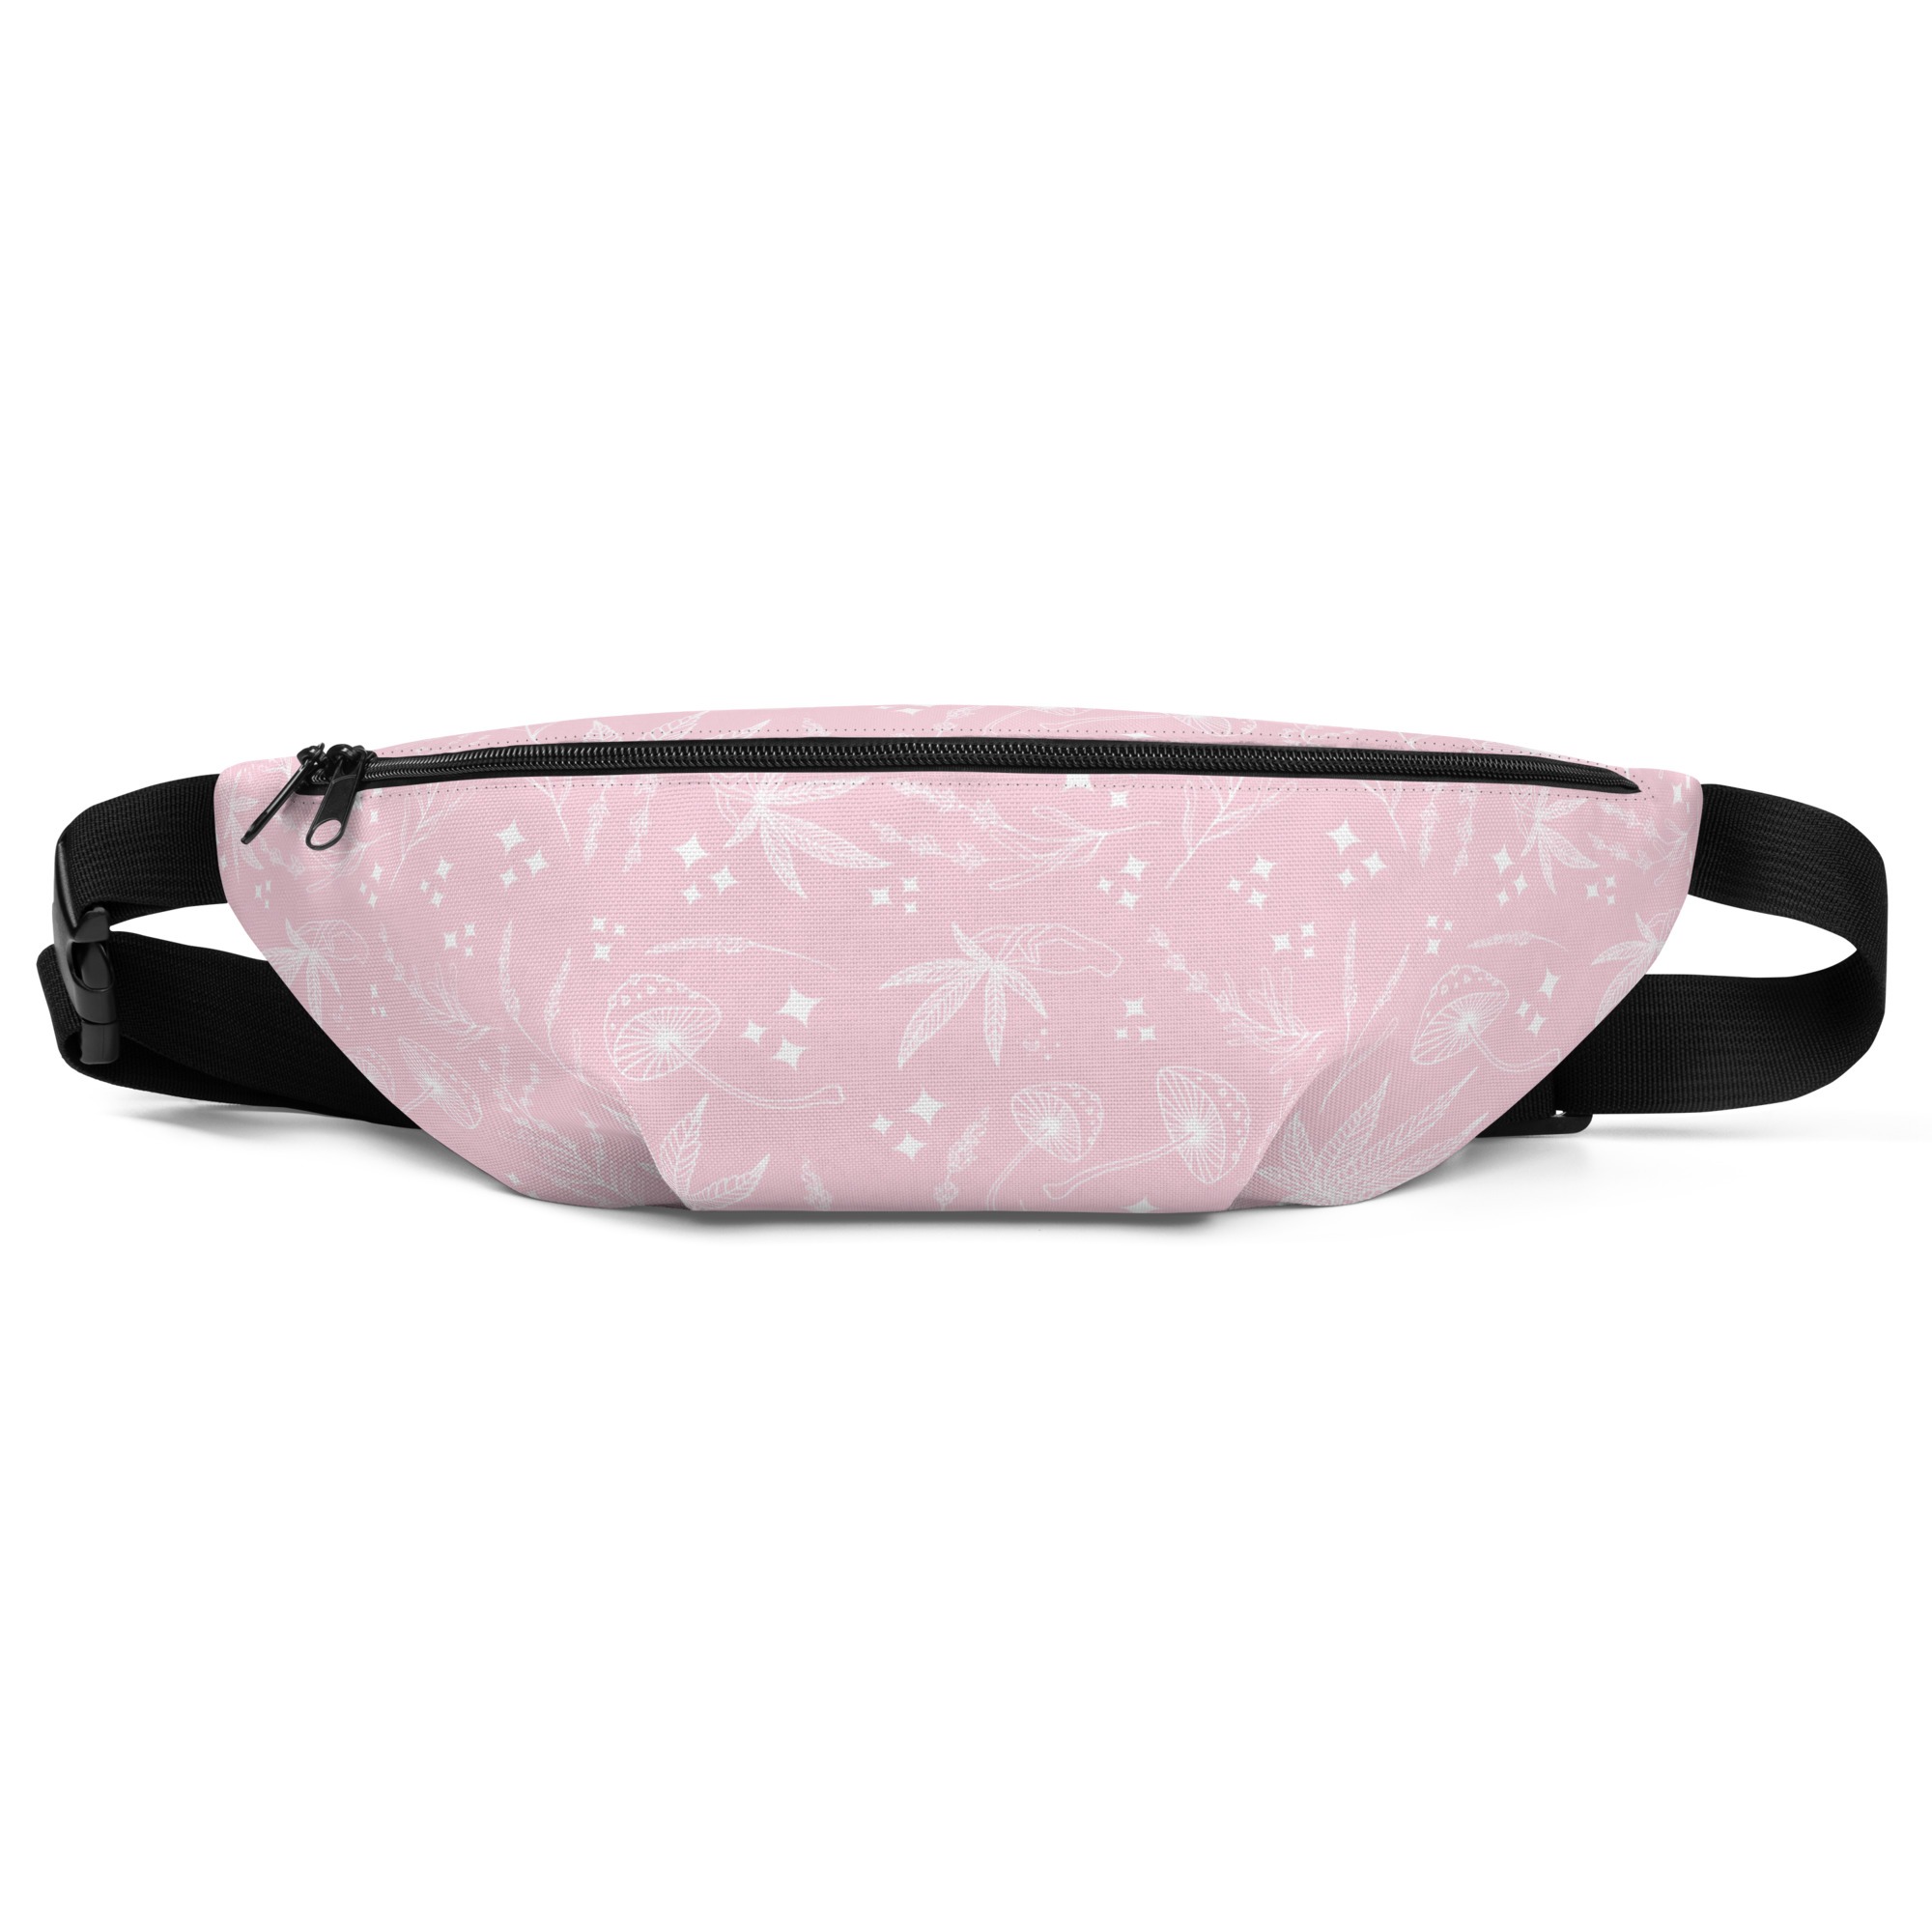 all-over-print-fanny-pack-white-front-64dcf3462f56a.jpg